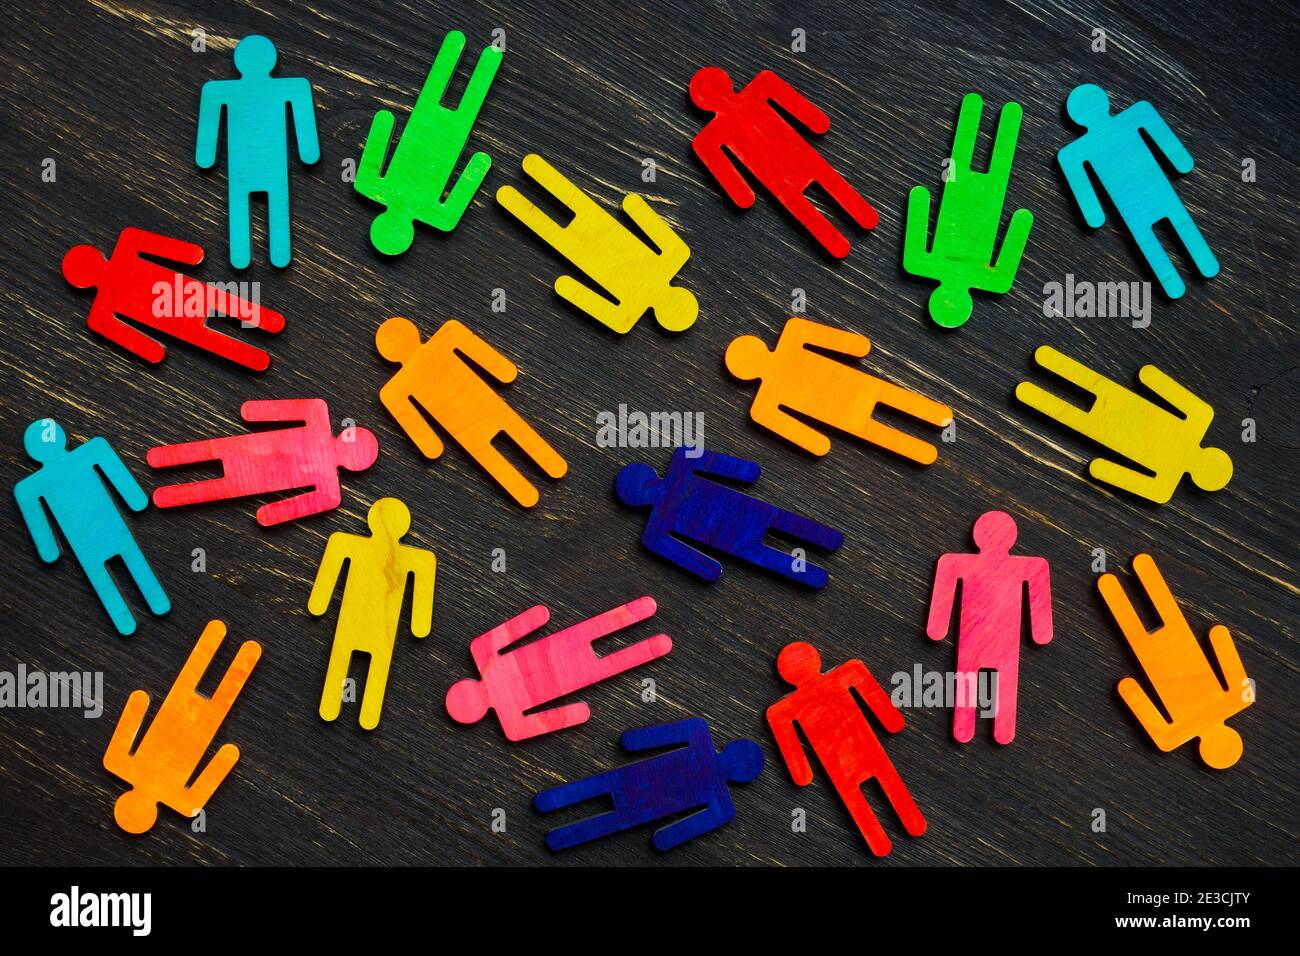 Colorful figures as background. Diversity and inclusion concept. Stock Photo